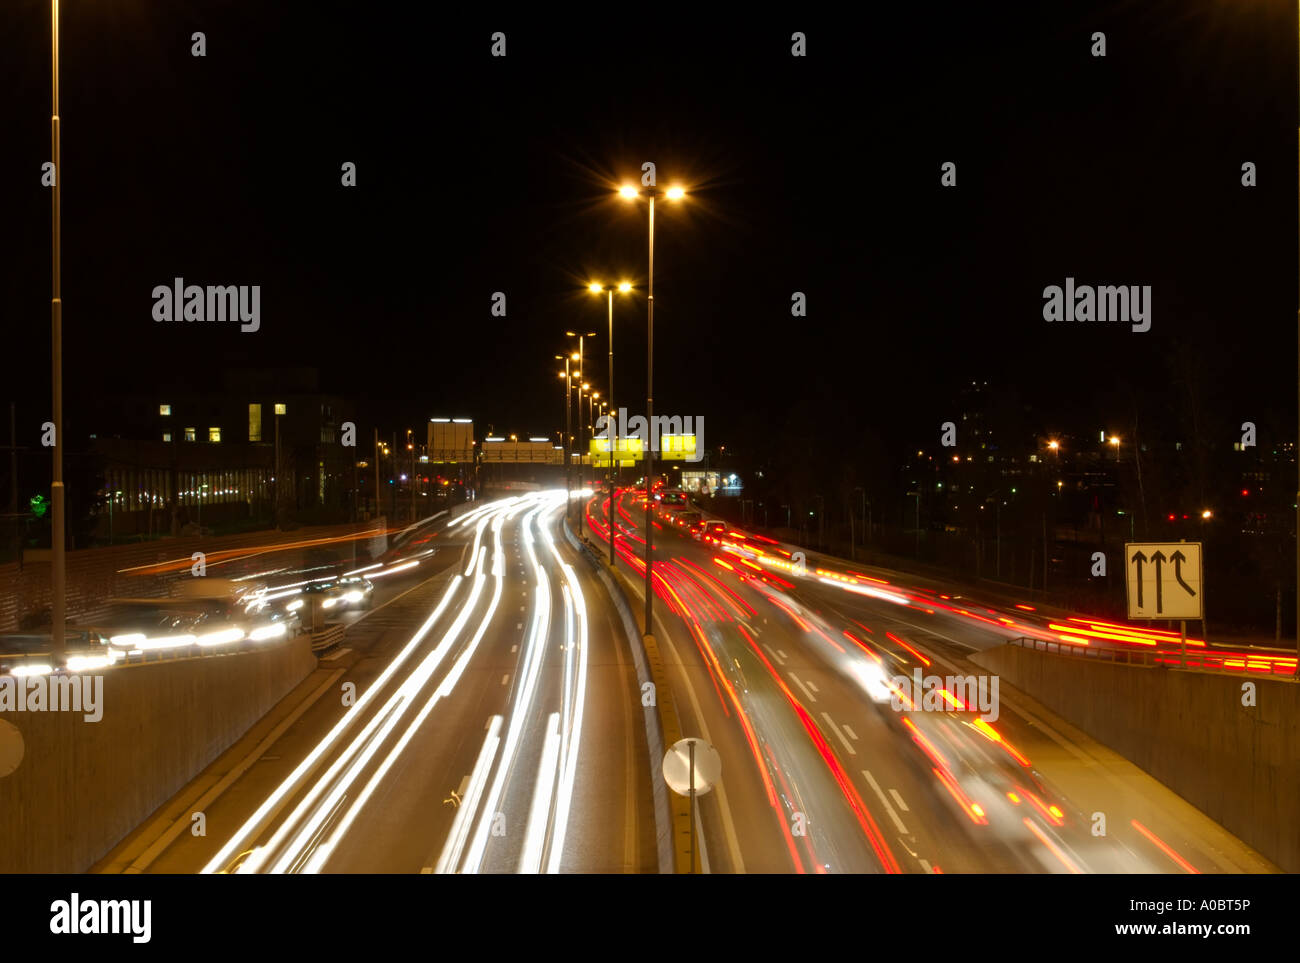 Lots of night traffic at a main road called Ring 3 running in the outskirts of Oslo the capitol city of Norway This image was ca Stock Photo